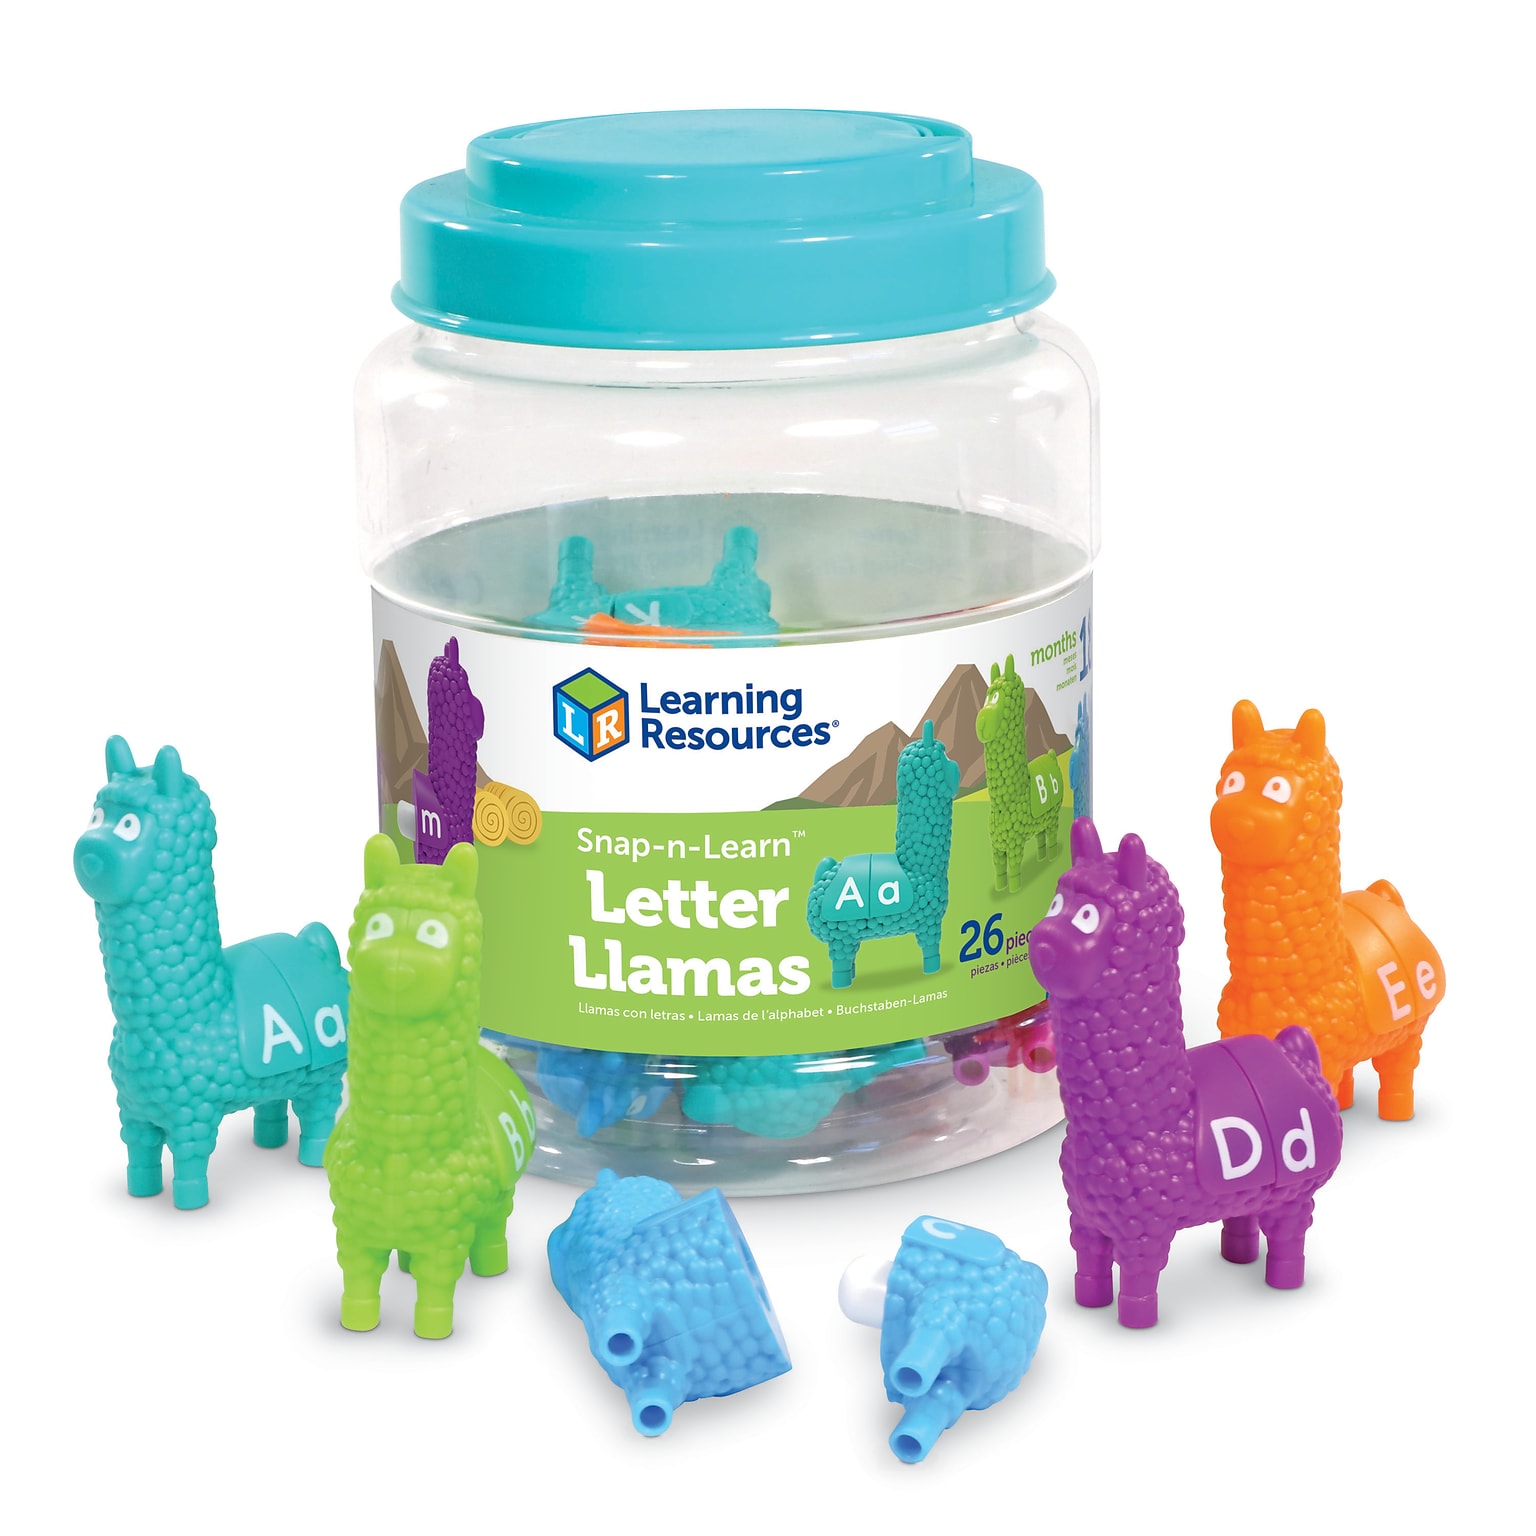 Learning Resources Snap-n-Learn Letter Llamas, Assorted Colors (LER6713)